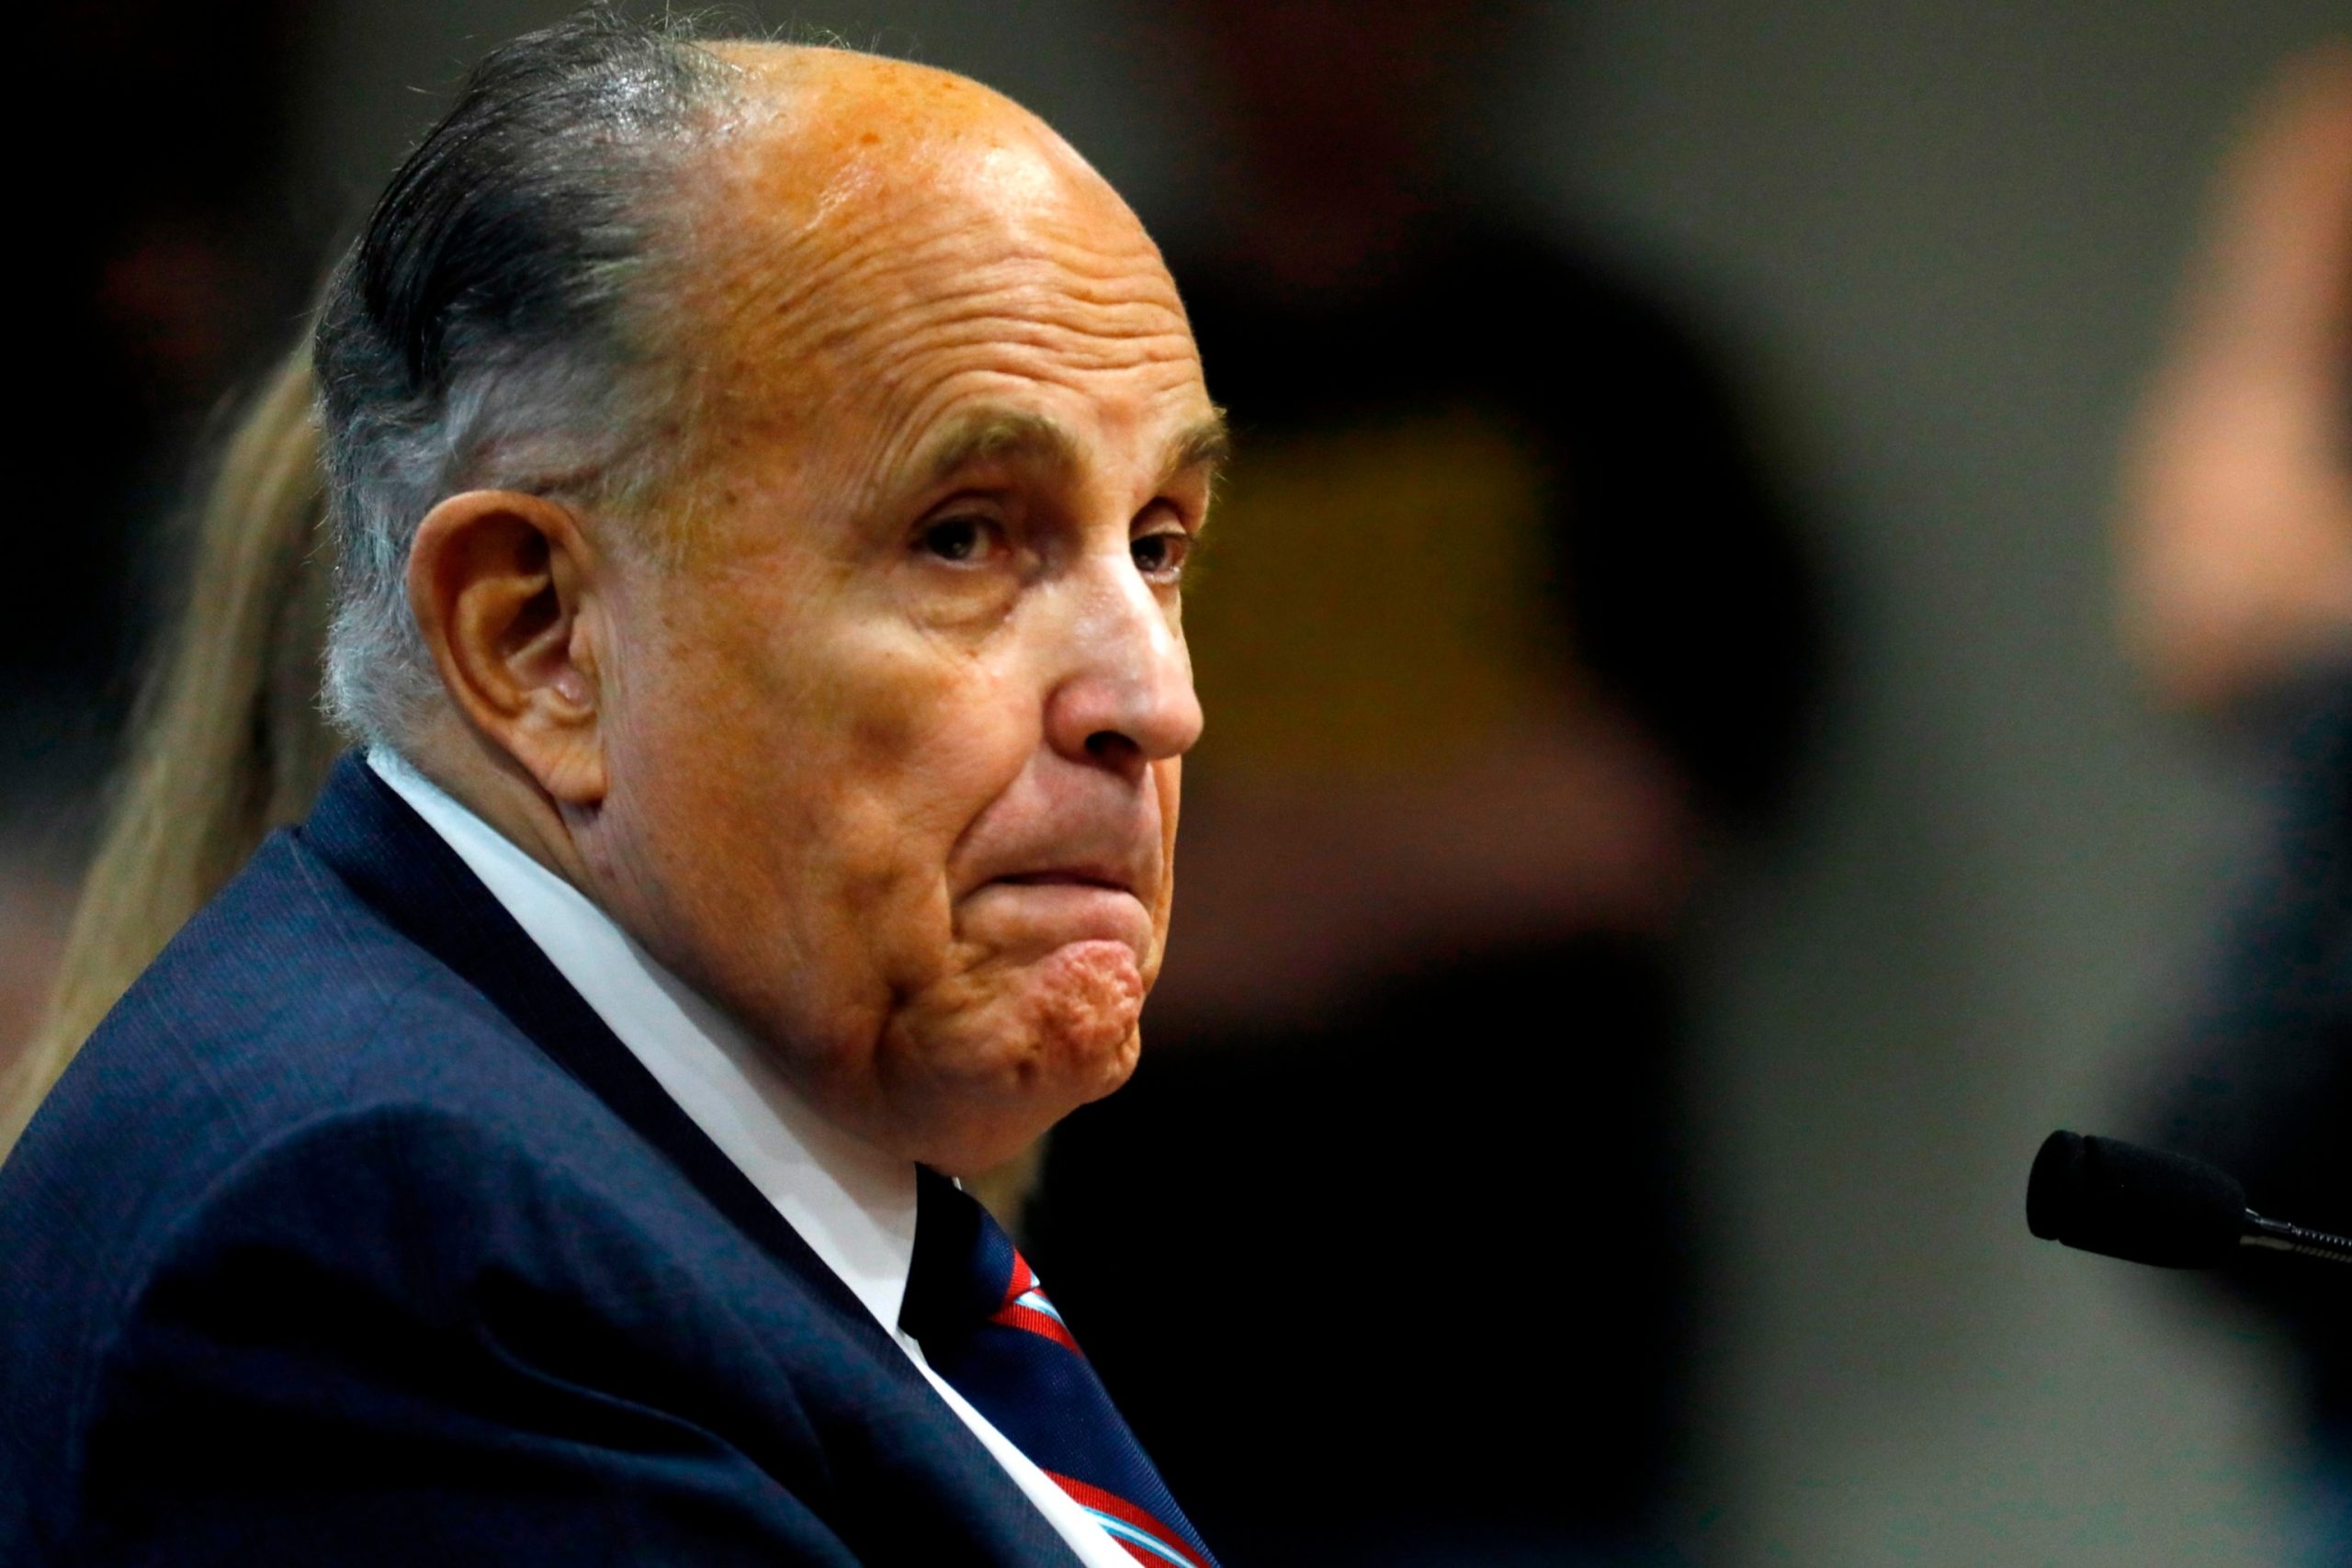 The potential consequences of Giuliani's legal troubles could worsen his financial situation